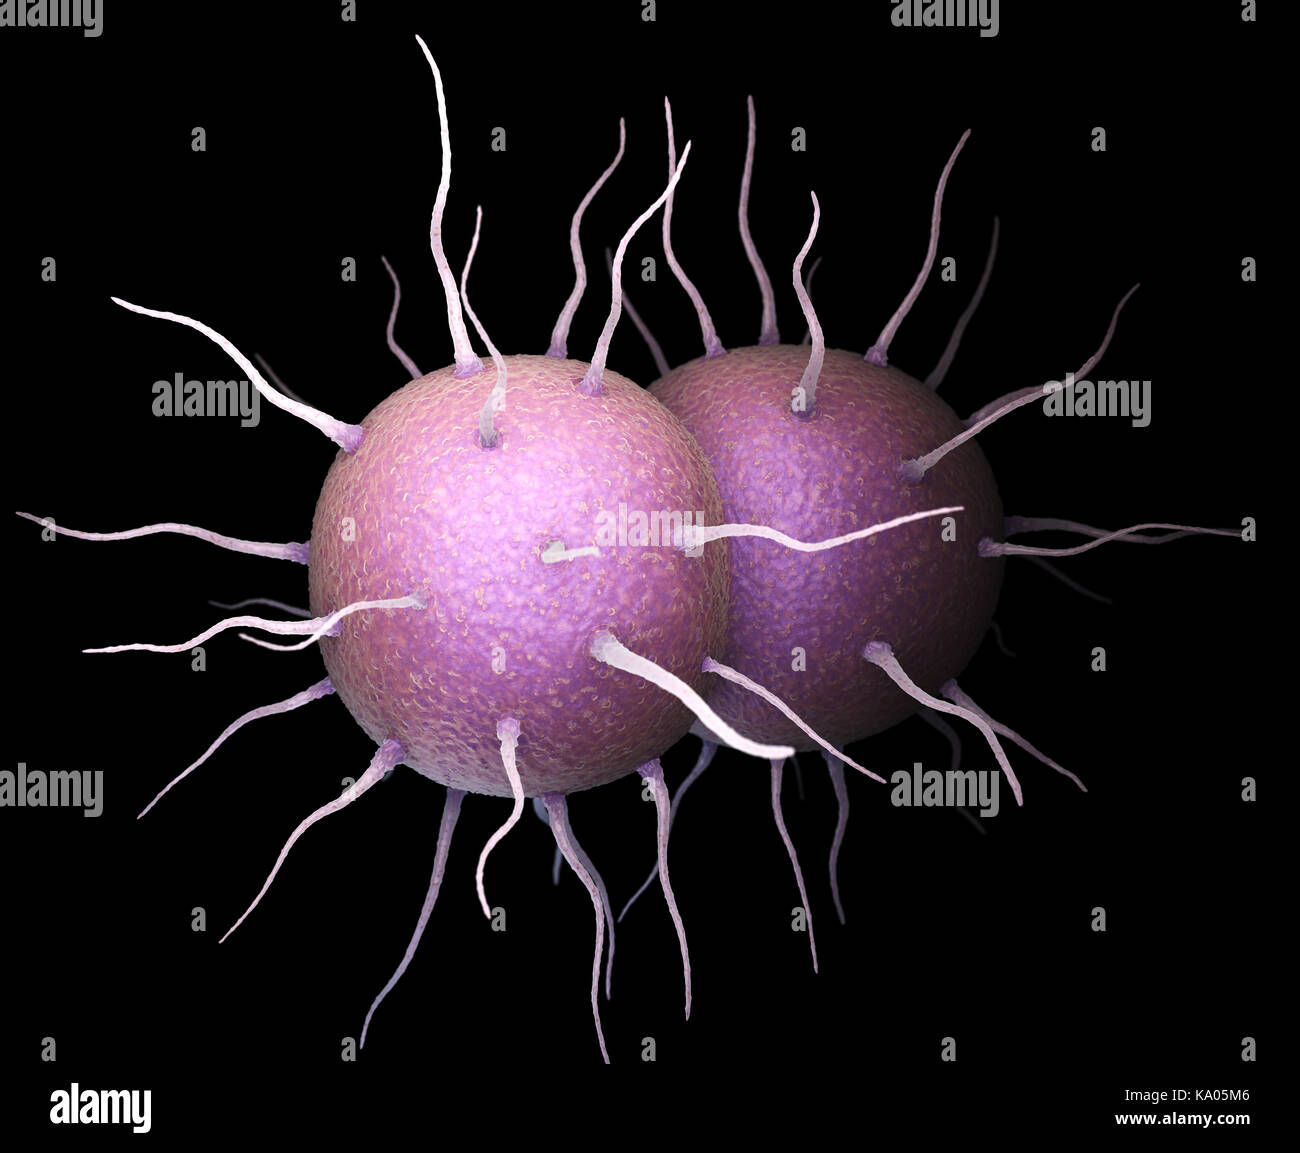 Neisseria gonorrhoeae, the bacterium responsible for the sexually transmitted infection Gonorrhea. 3D illustration Stock Photo